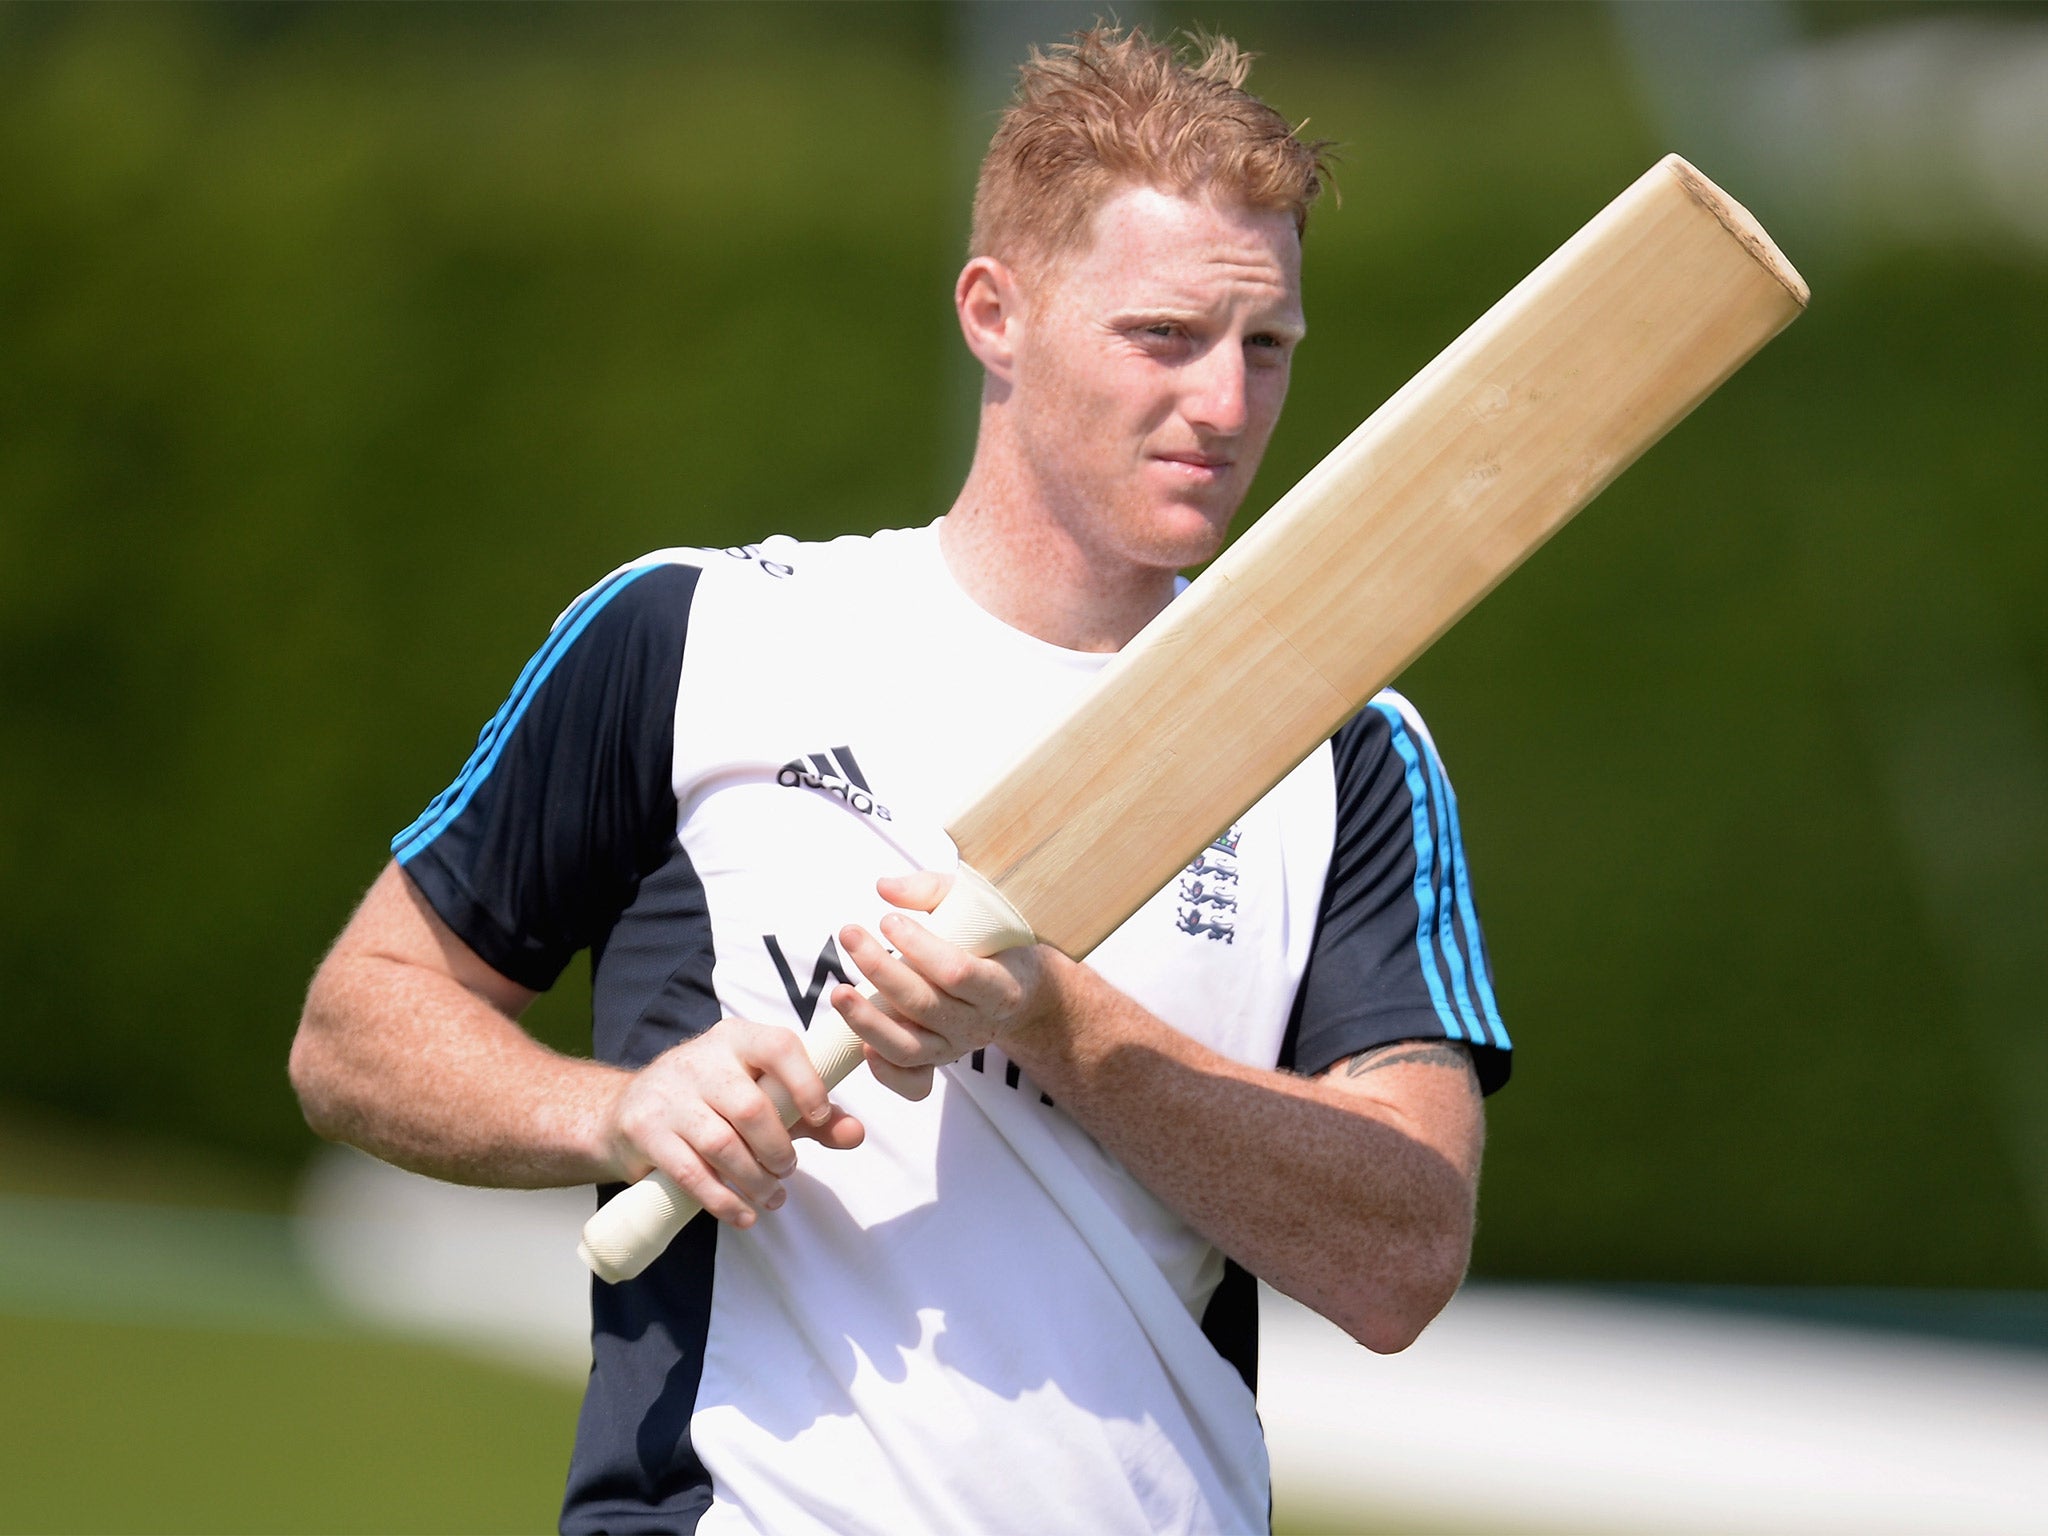 Ben Stokes made up for a disappointing summer in England colours with a dazzling century for Durham in a one-day semi-final